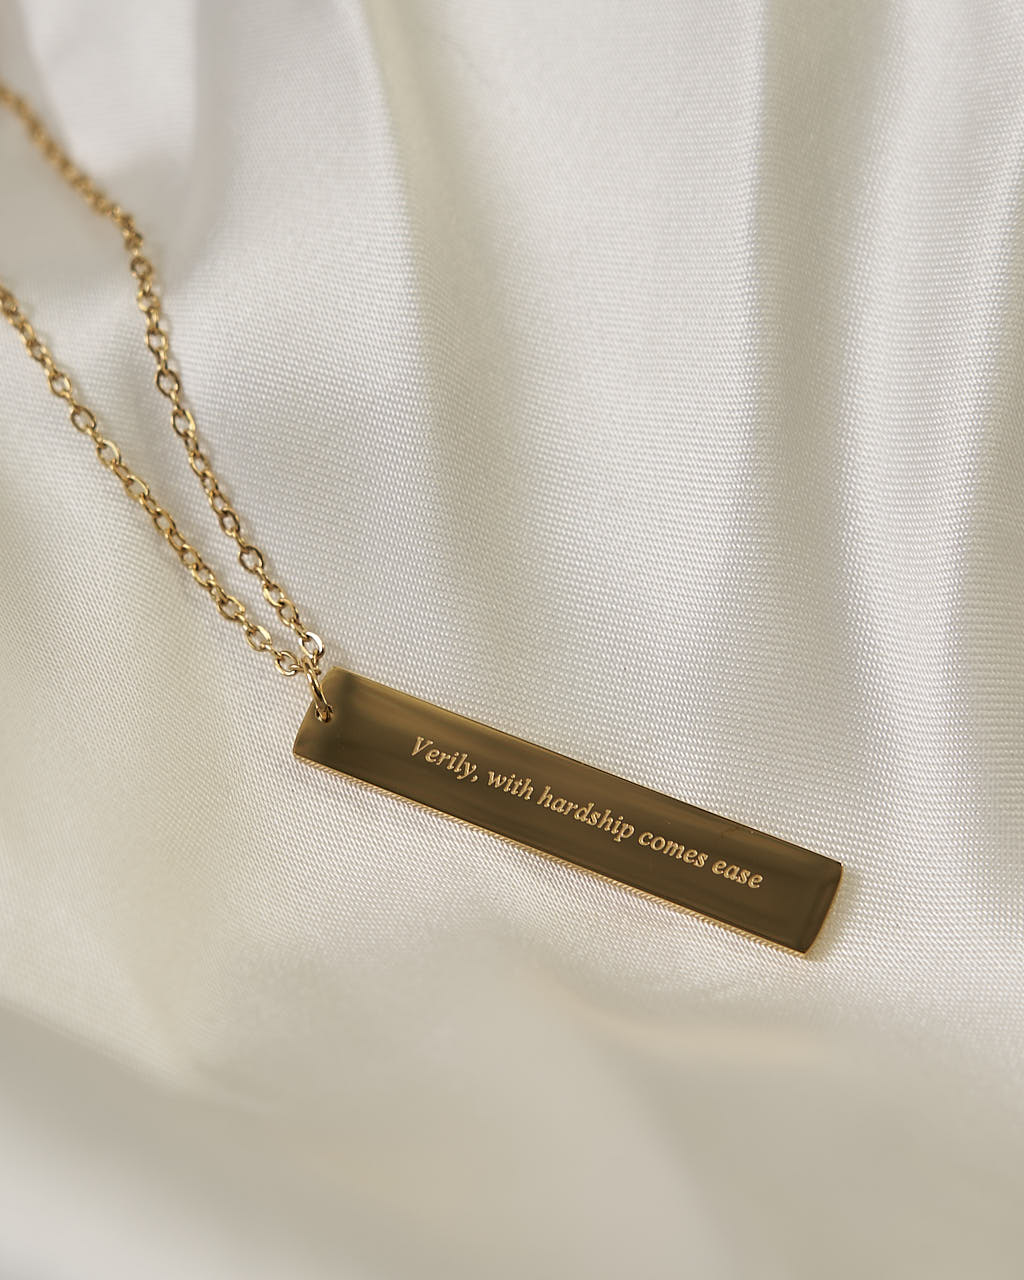 "Verily, with hardship comes ease" Necklace